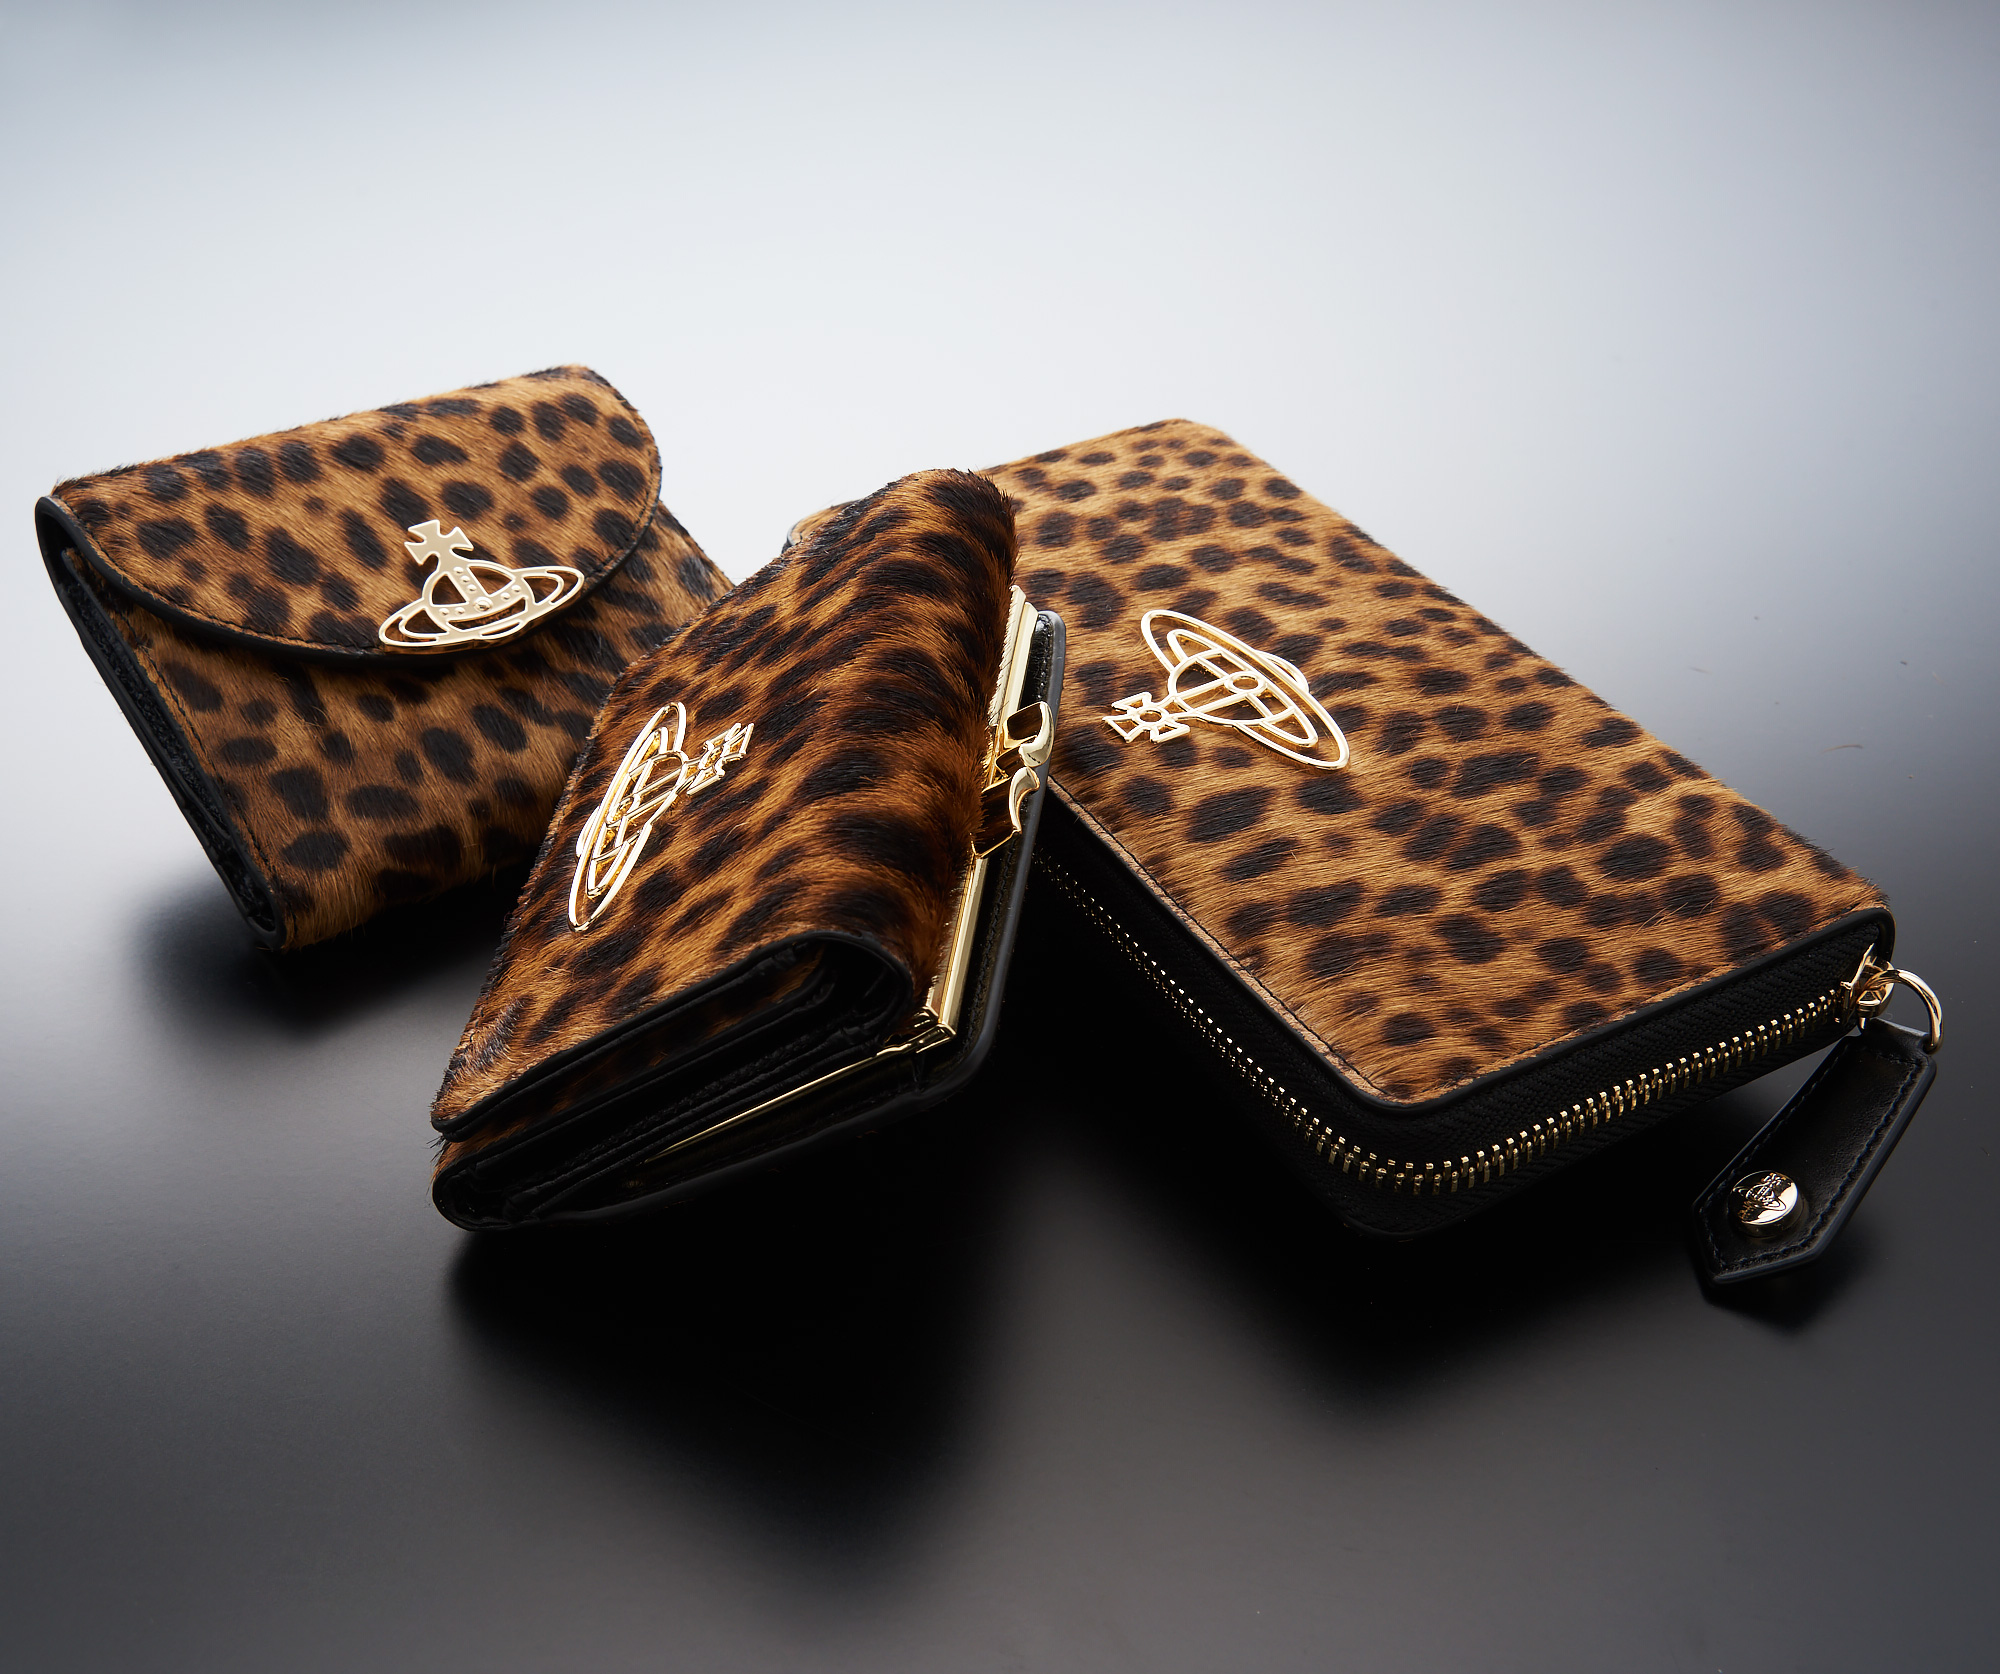 Vivienne Westwood “LEOPARD HAIRCALF Leather Goods” On Sale｜【公式 ...